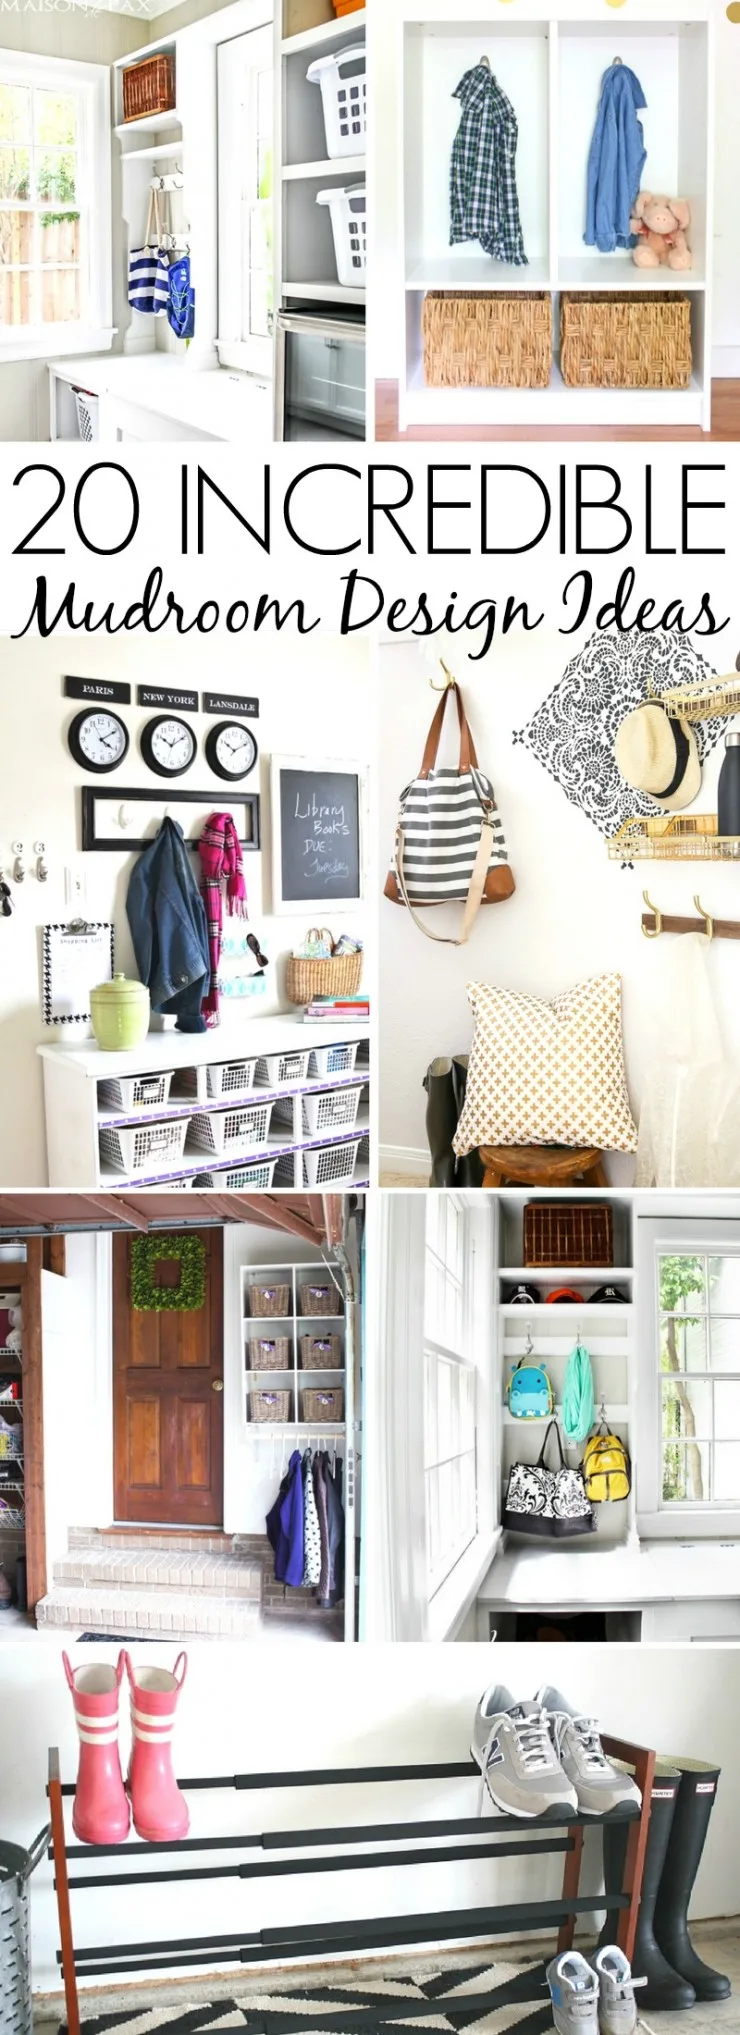 These 20 Incredible Mudroom Design Ideas will inspire you to create your own beautiful and organized entry space. Great home organization and home decor ideas here!